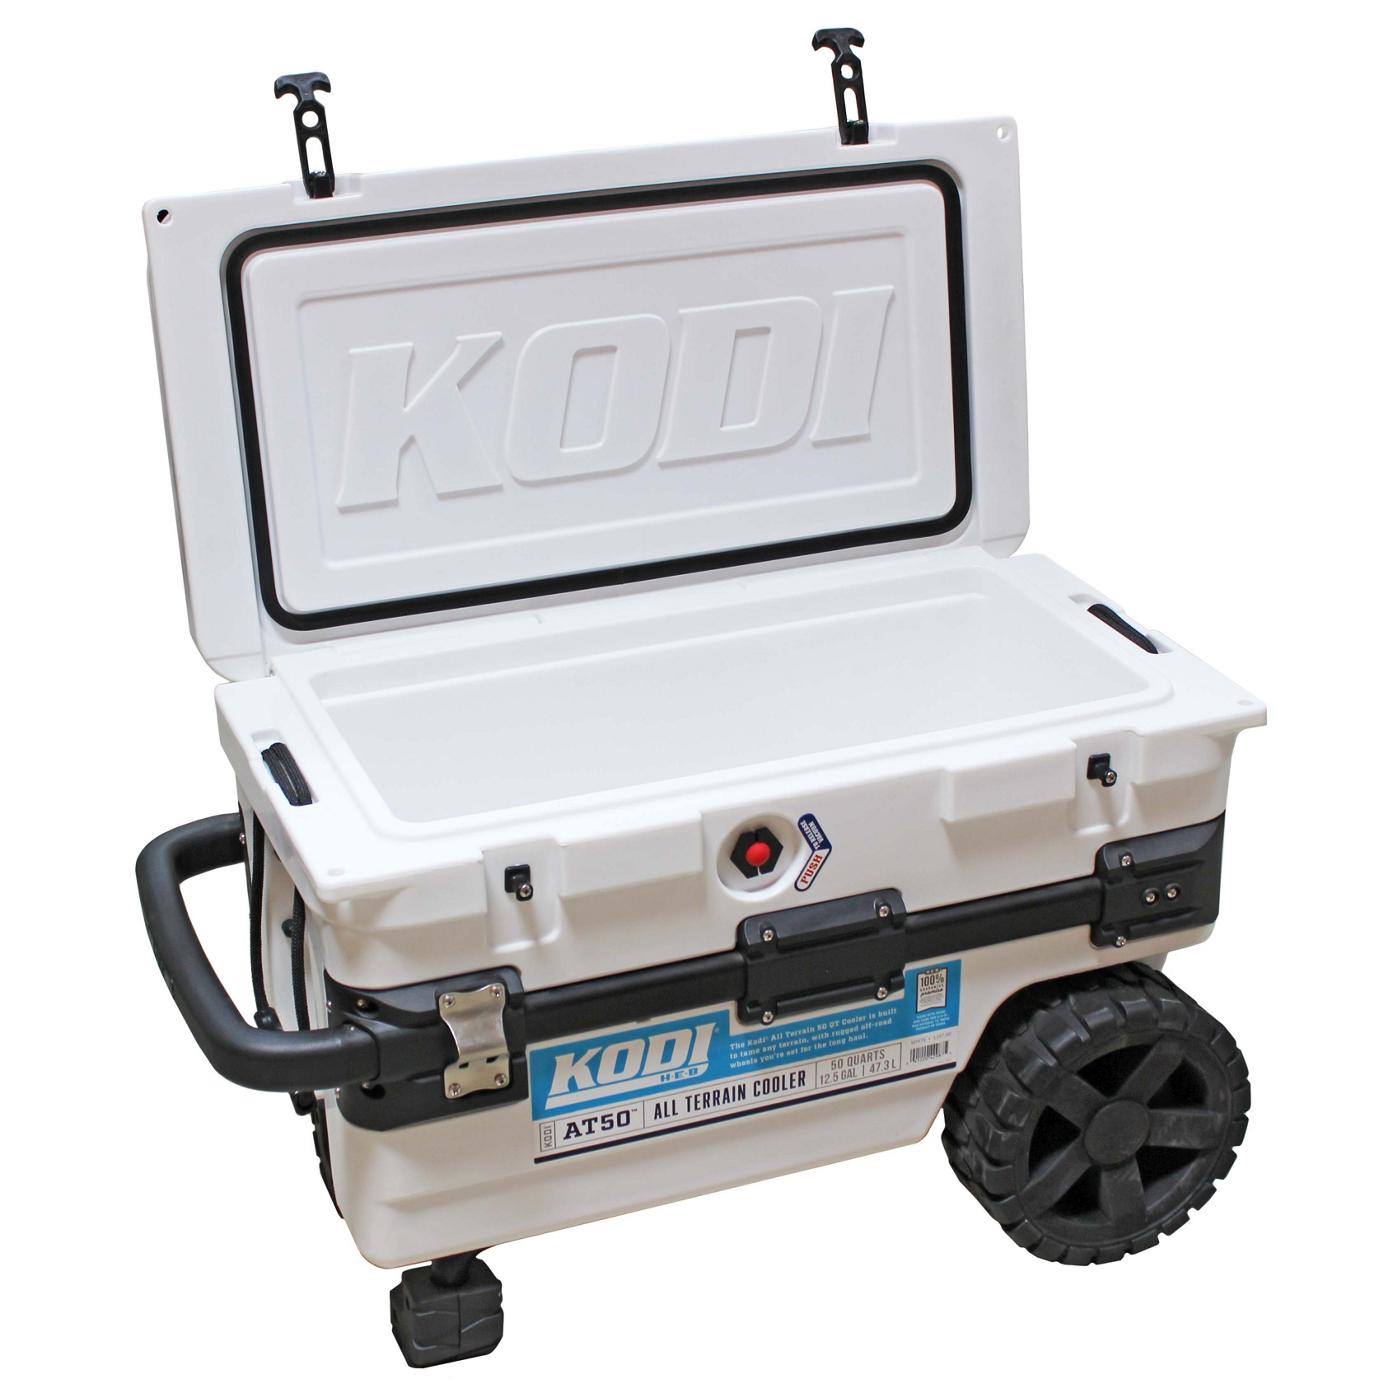 KODI by H-E-B AT50 All Terrain Wheeled Cooler - White; image 2 of 2